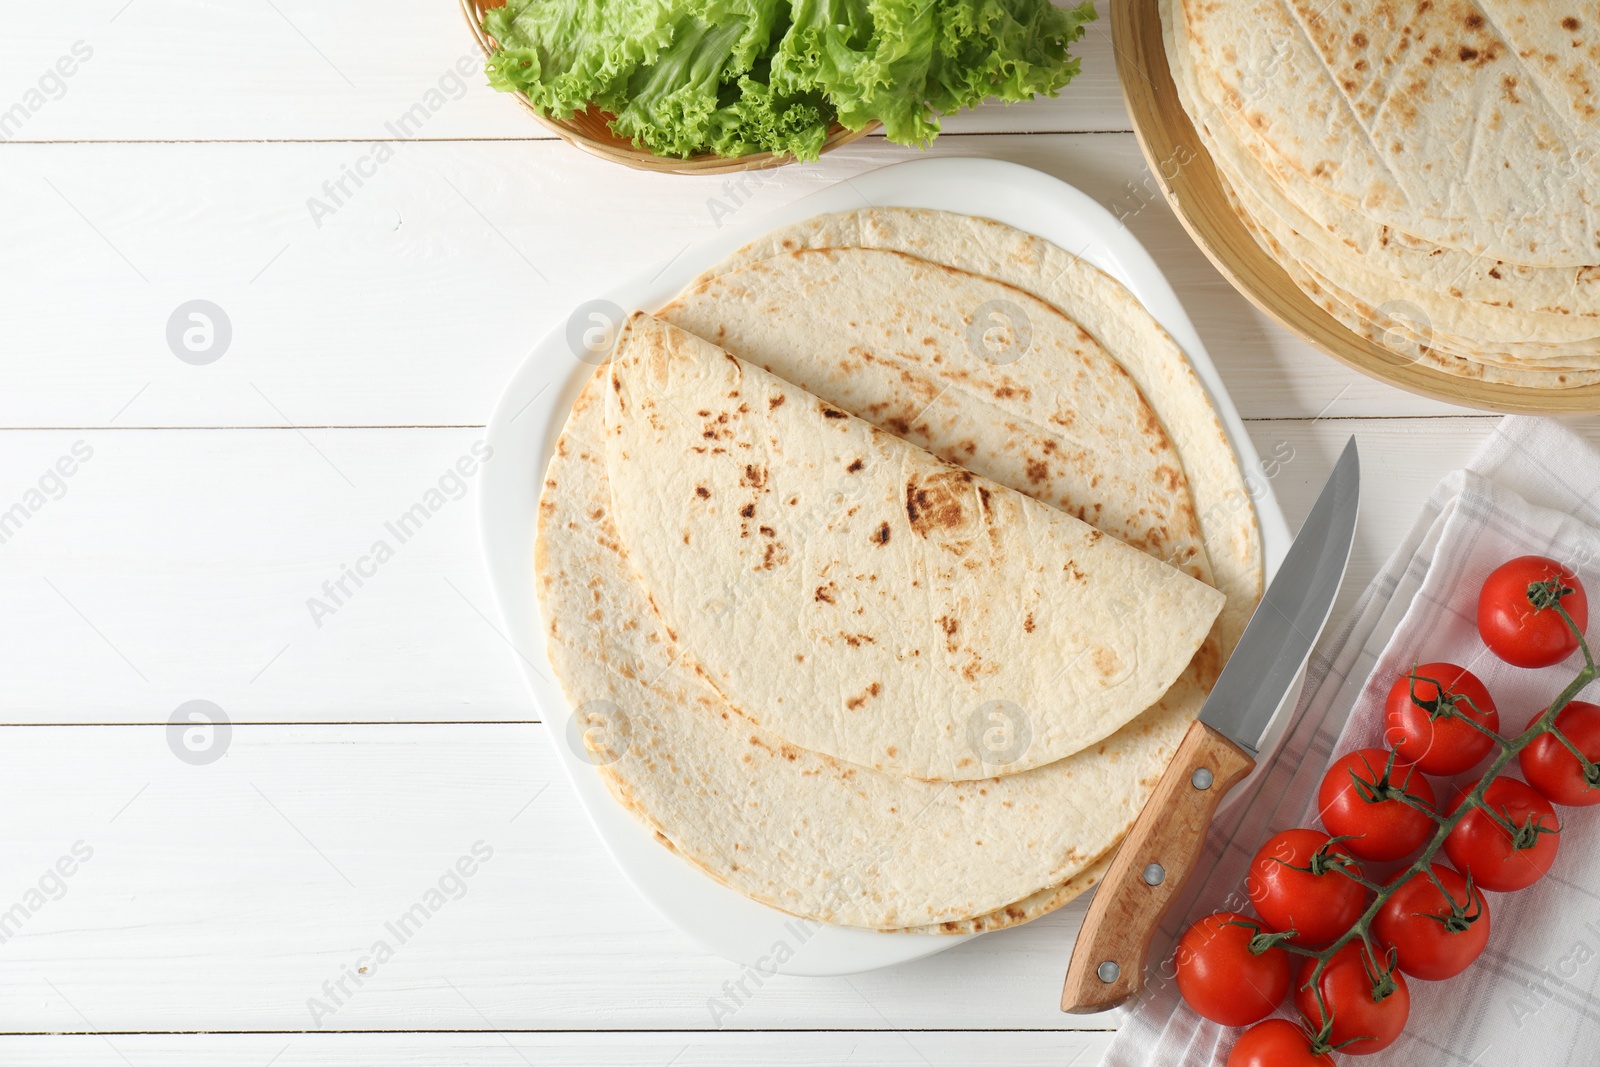 Photo of Tasty homemade tortillas, tomatoes, lettuce and knife on white wooden table, top view. Space for text